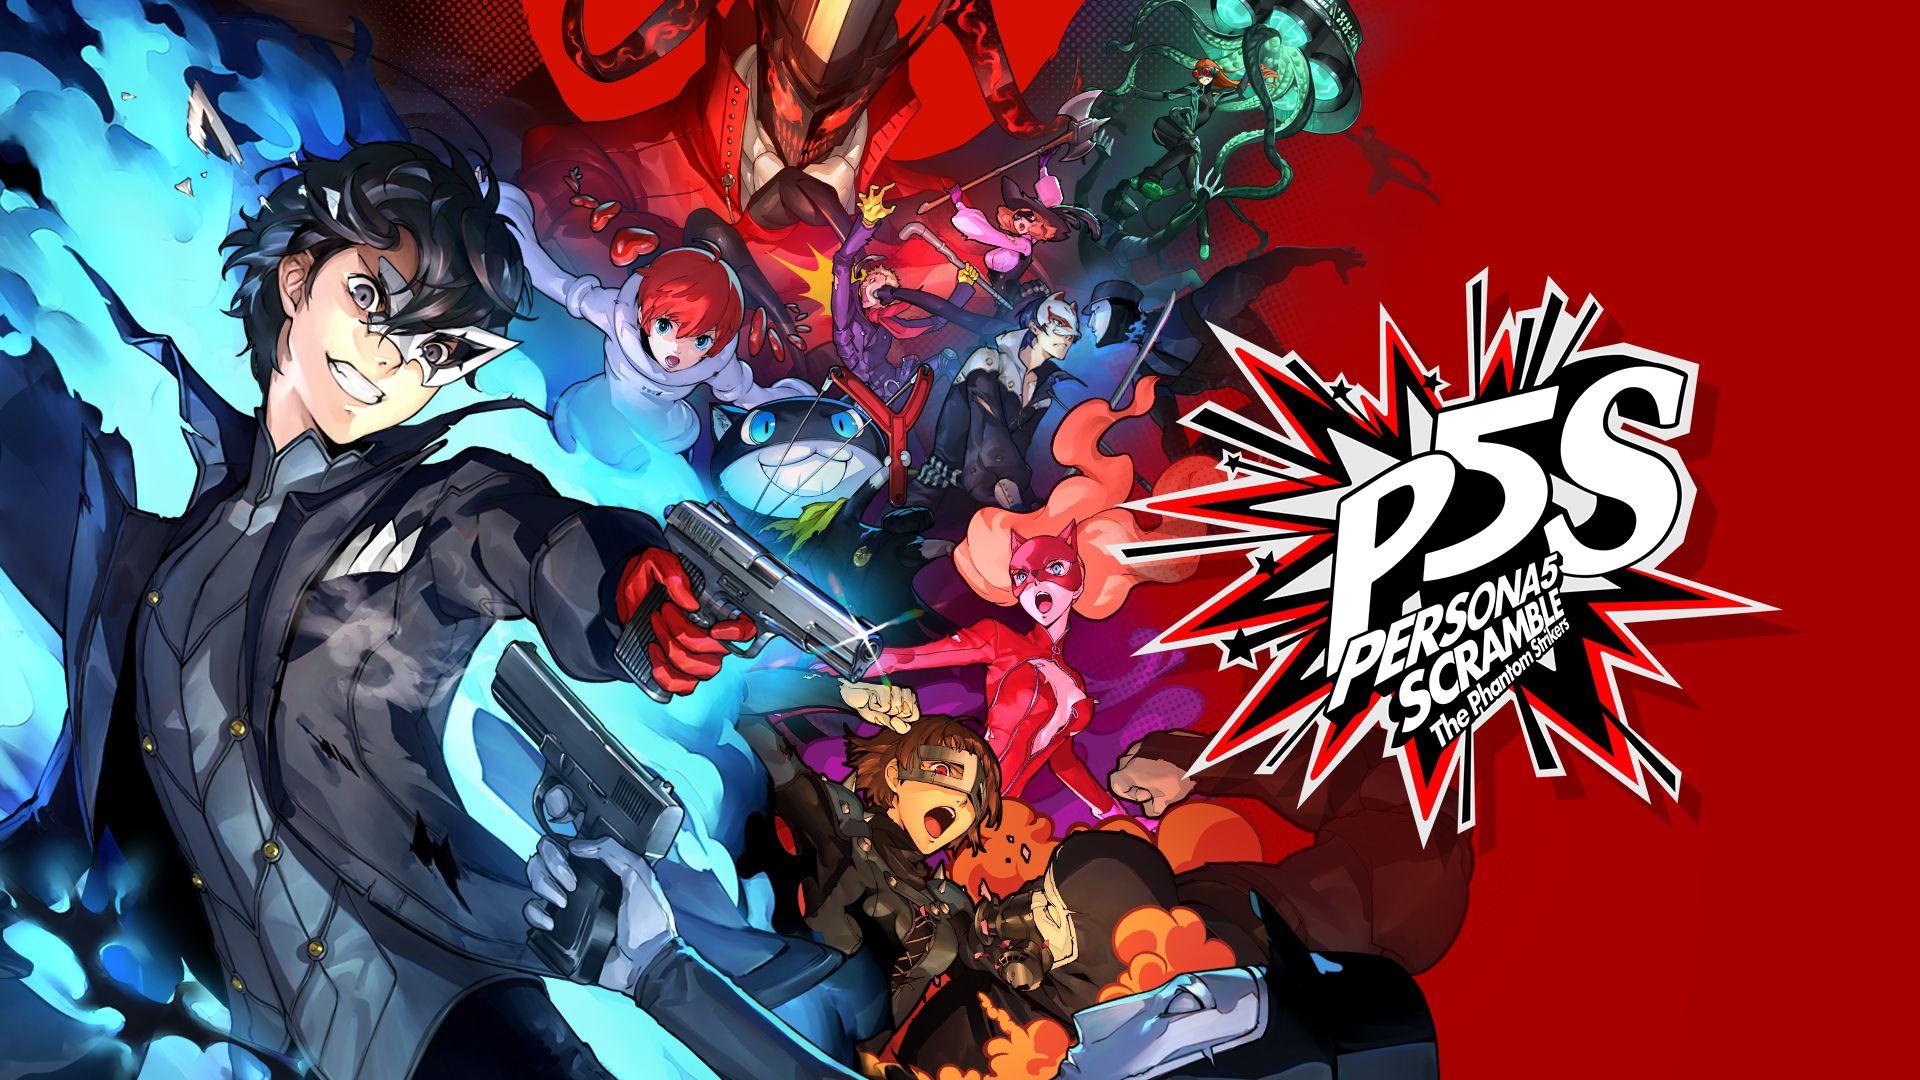 Persona 5 Strikers Wallpapers Top Free Persona 5 Strikers Backgrounds Wallpaperaccess